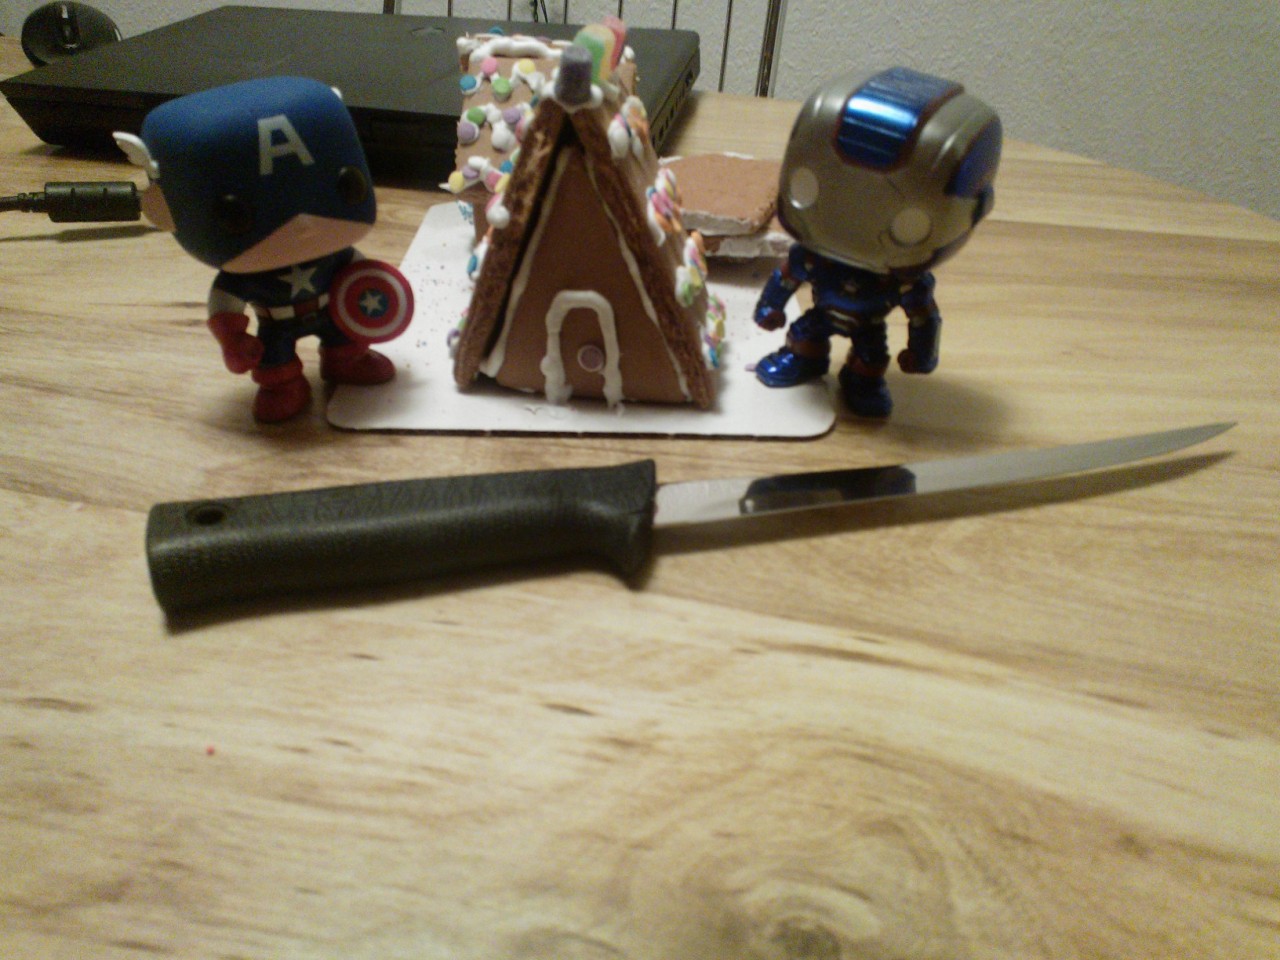 A better picture of the presents I got for my husband &lt;3 I got him a Gerber